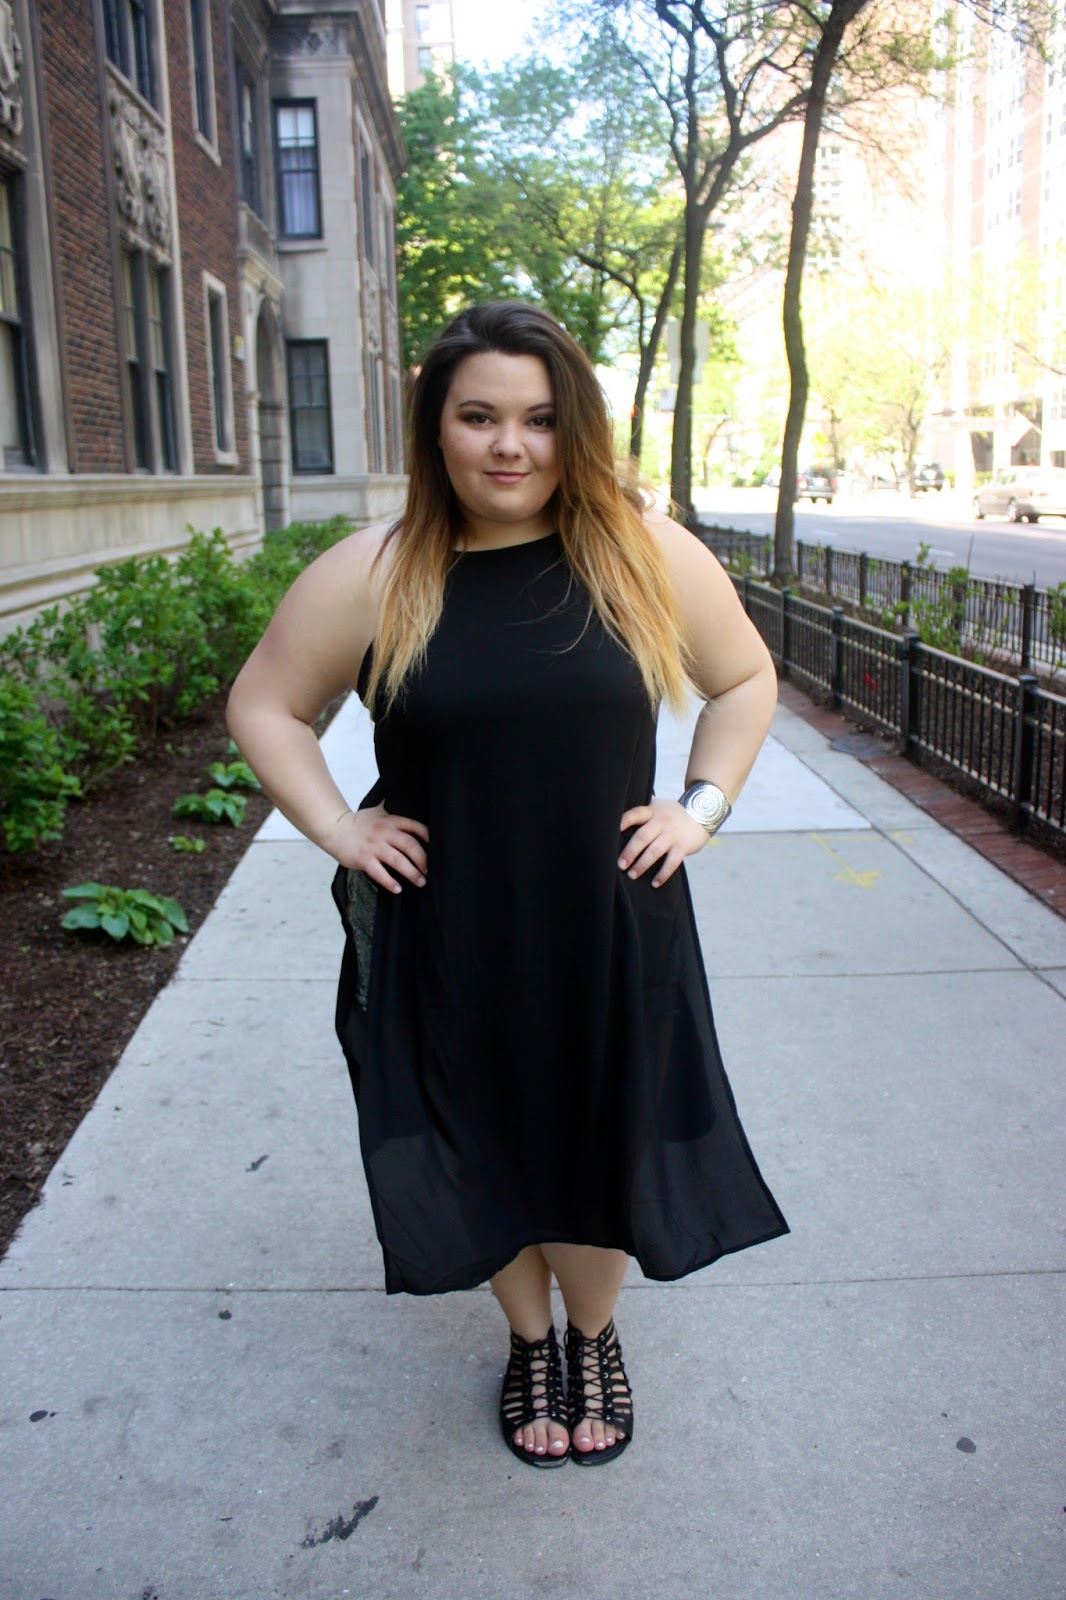 Forever 21 plus, plus size fashion, ps fashion, natalie craig, natalie in the city, chicago, chicago blogger network, dress with slits, dress slits, ombre hairstyle, tribal print shorts, acid wash shorts, bbw, curvy, tribal accessories, summer style 2015